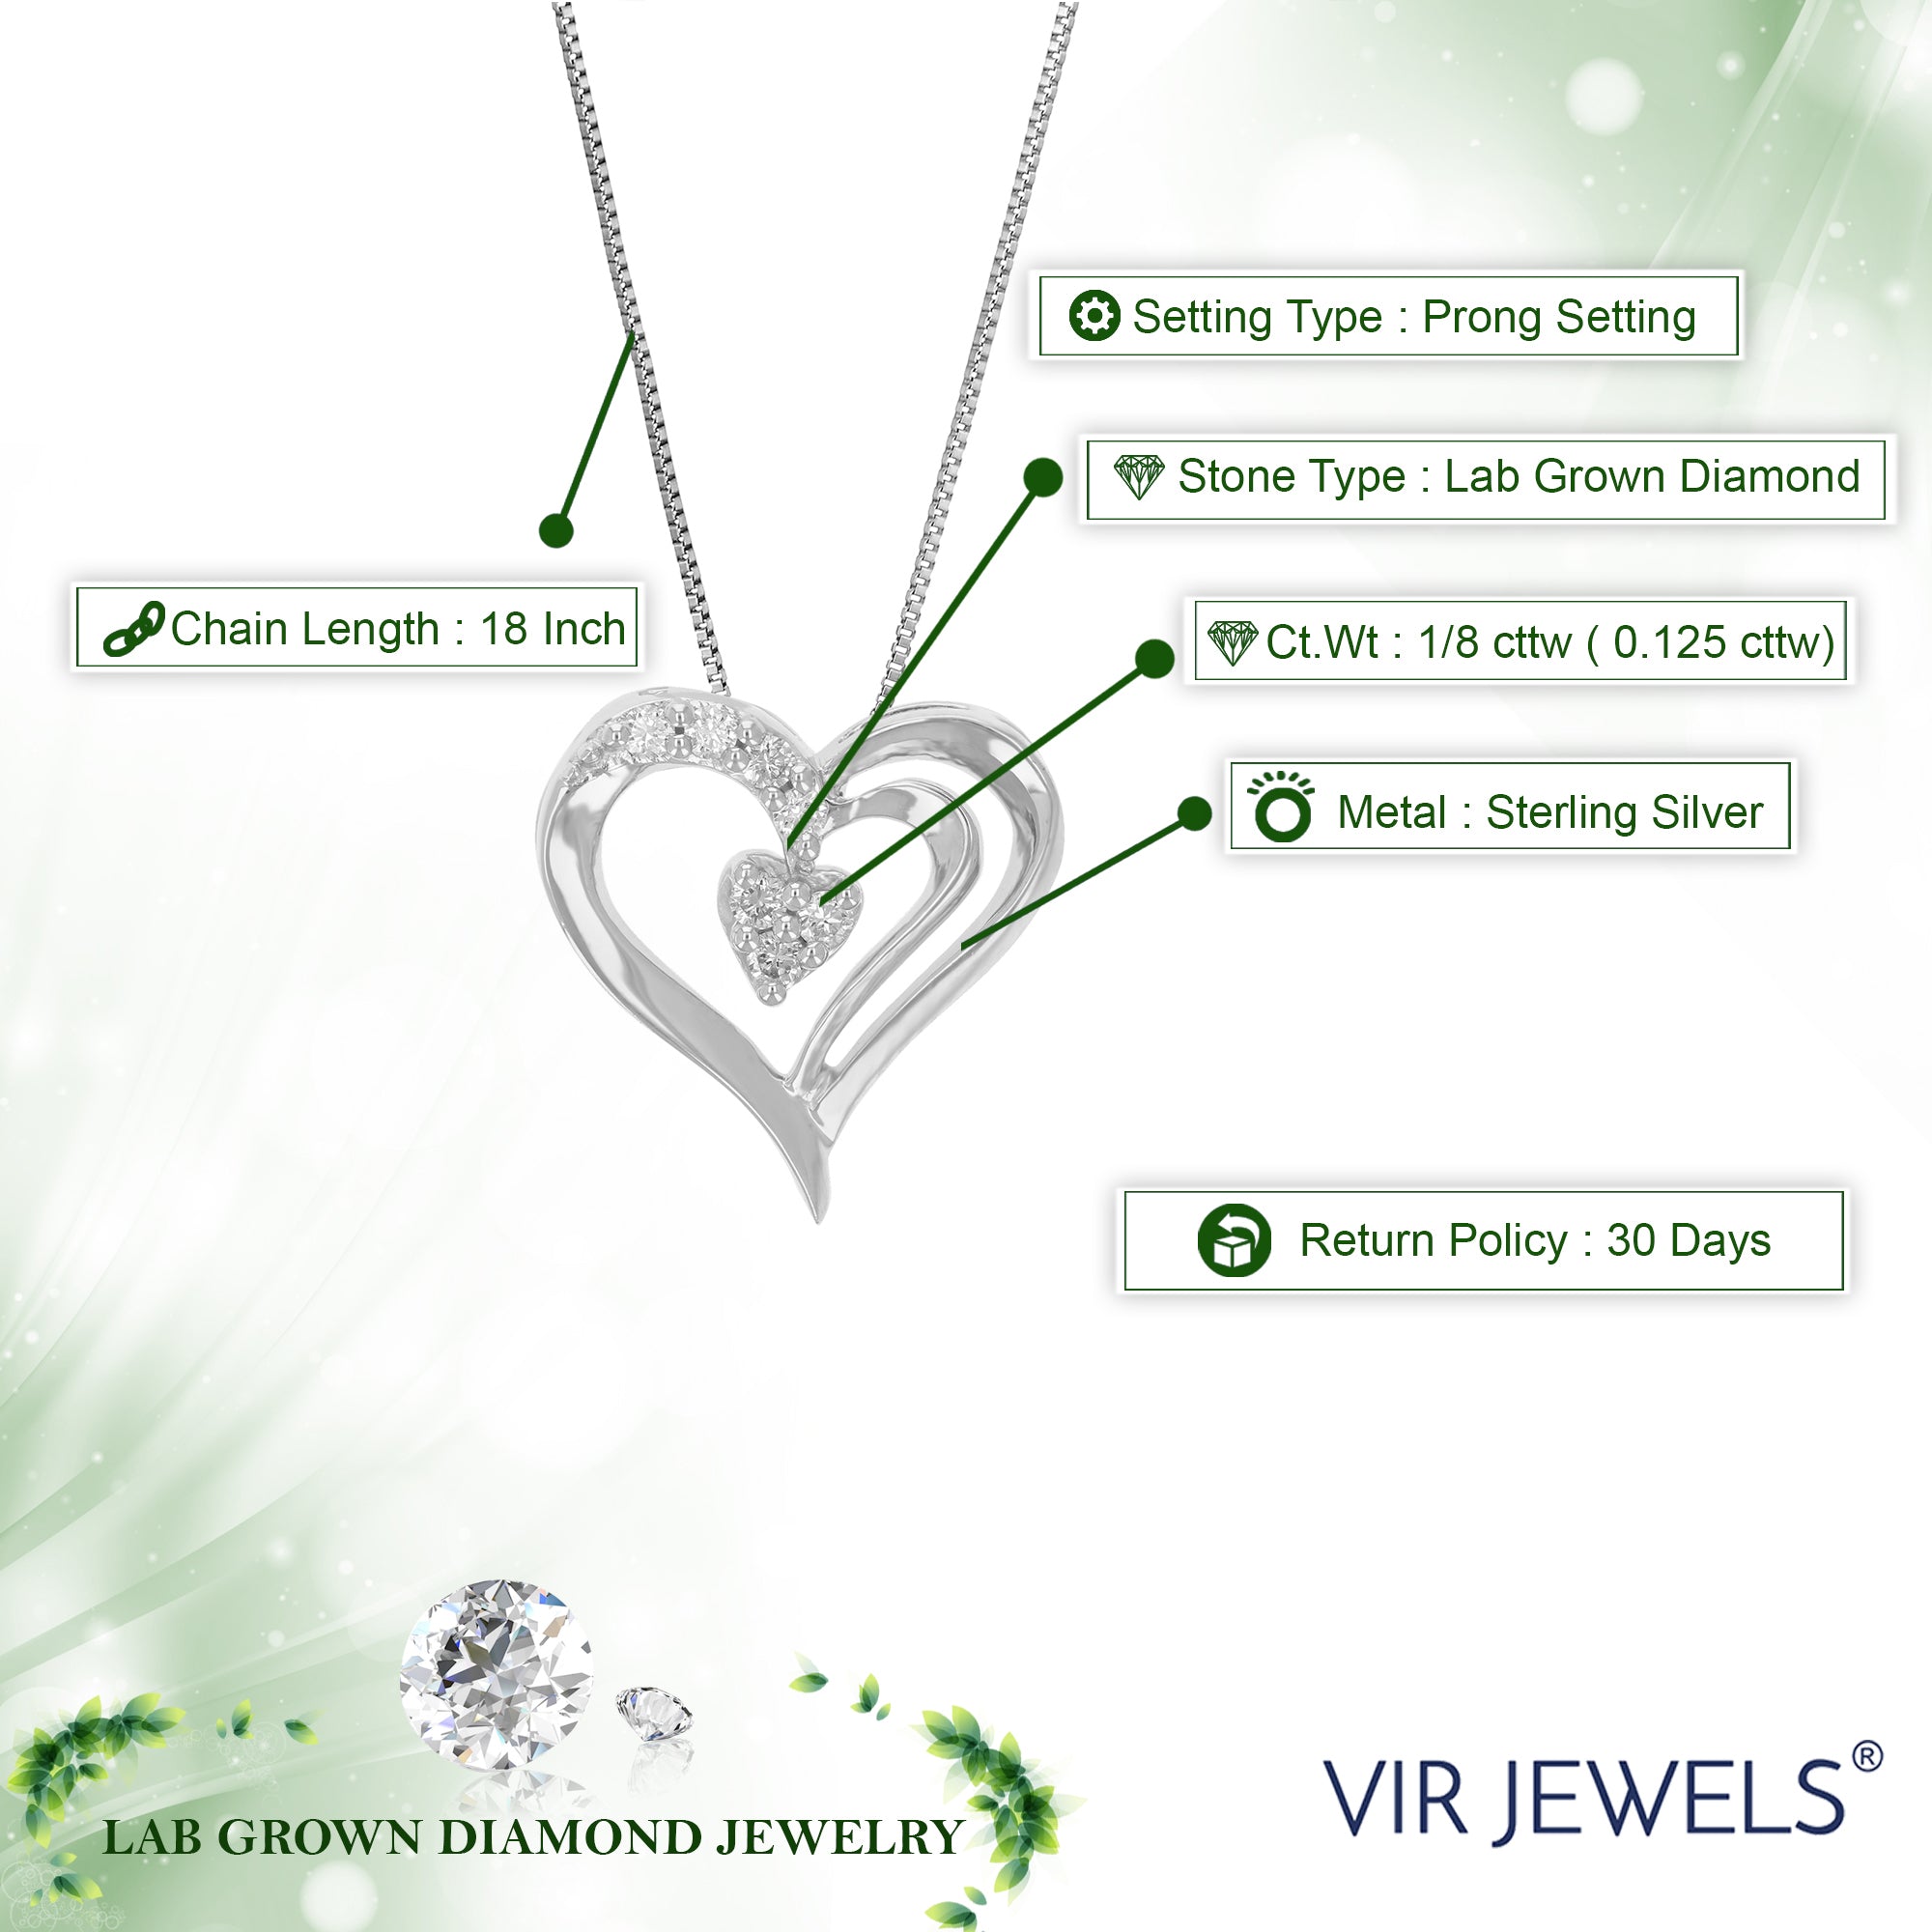 1/8 cttw Diamond Pendant Necklace for Women, Lab Grown Diamond Heart Pendant Necklace in .925 Sterling Silver with Chain, Size 1/2 Inch